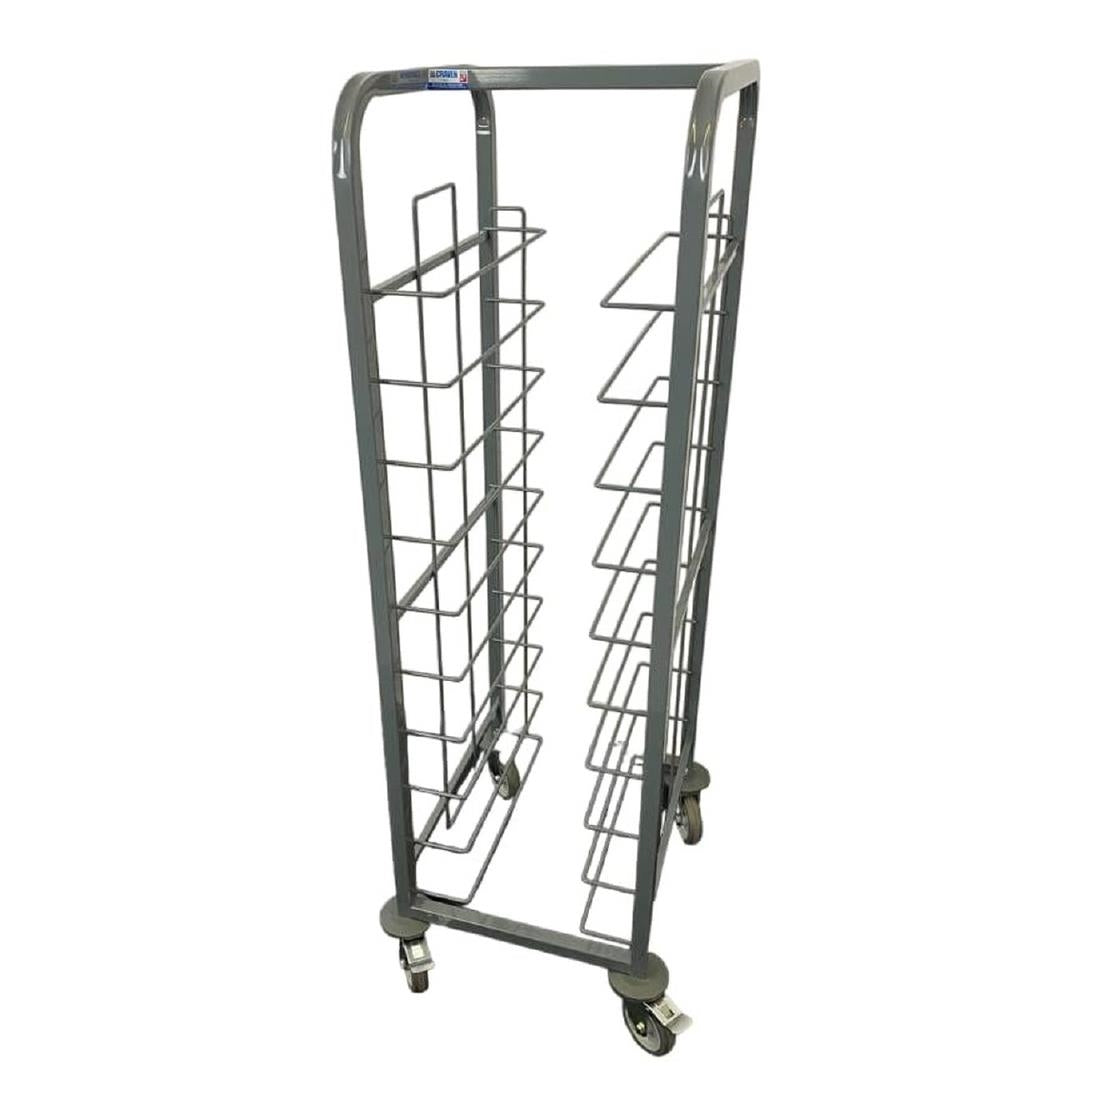 Craven Steel Self Clearing Trolley 10 Shelves JD Catering Equipment Solutions Ltd